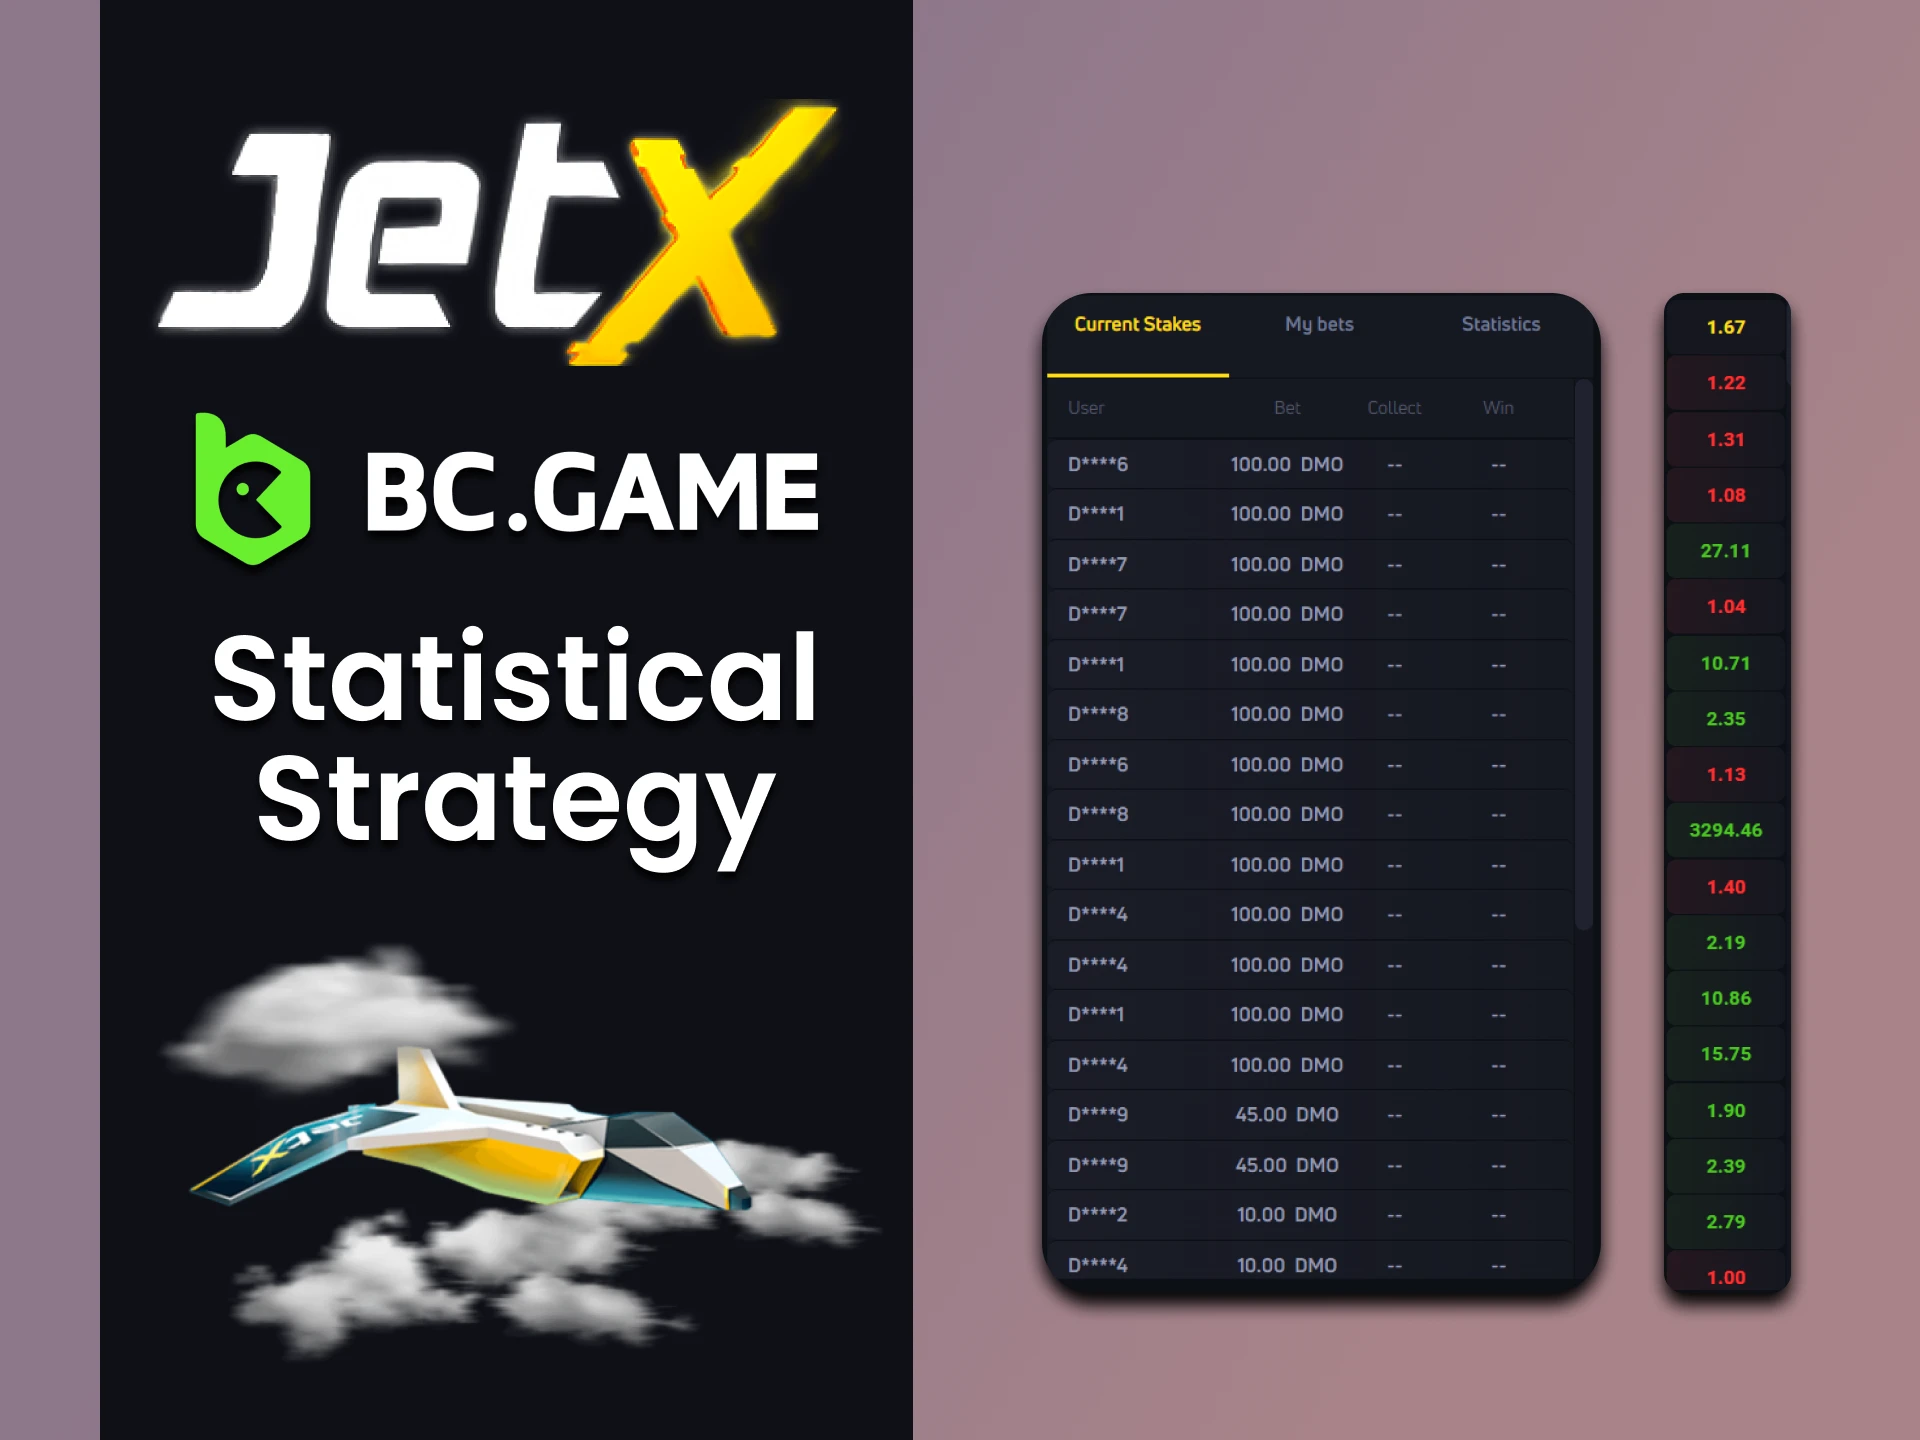 You can choose a strategy based on statistics in JetX games from BC Game.